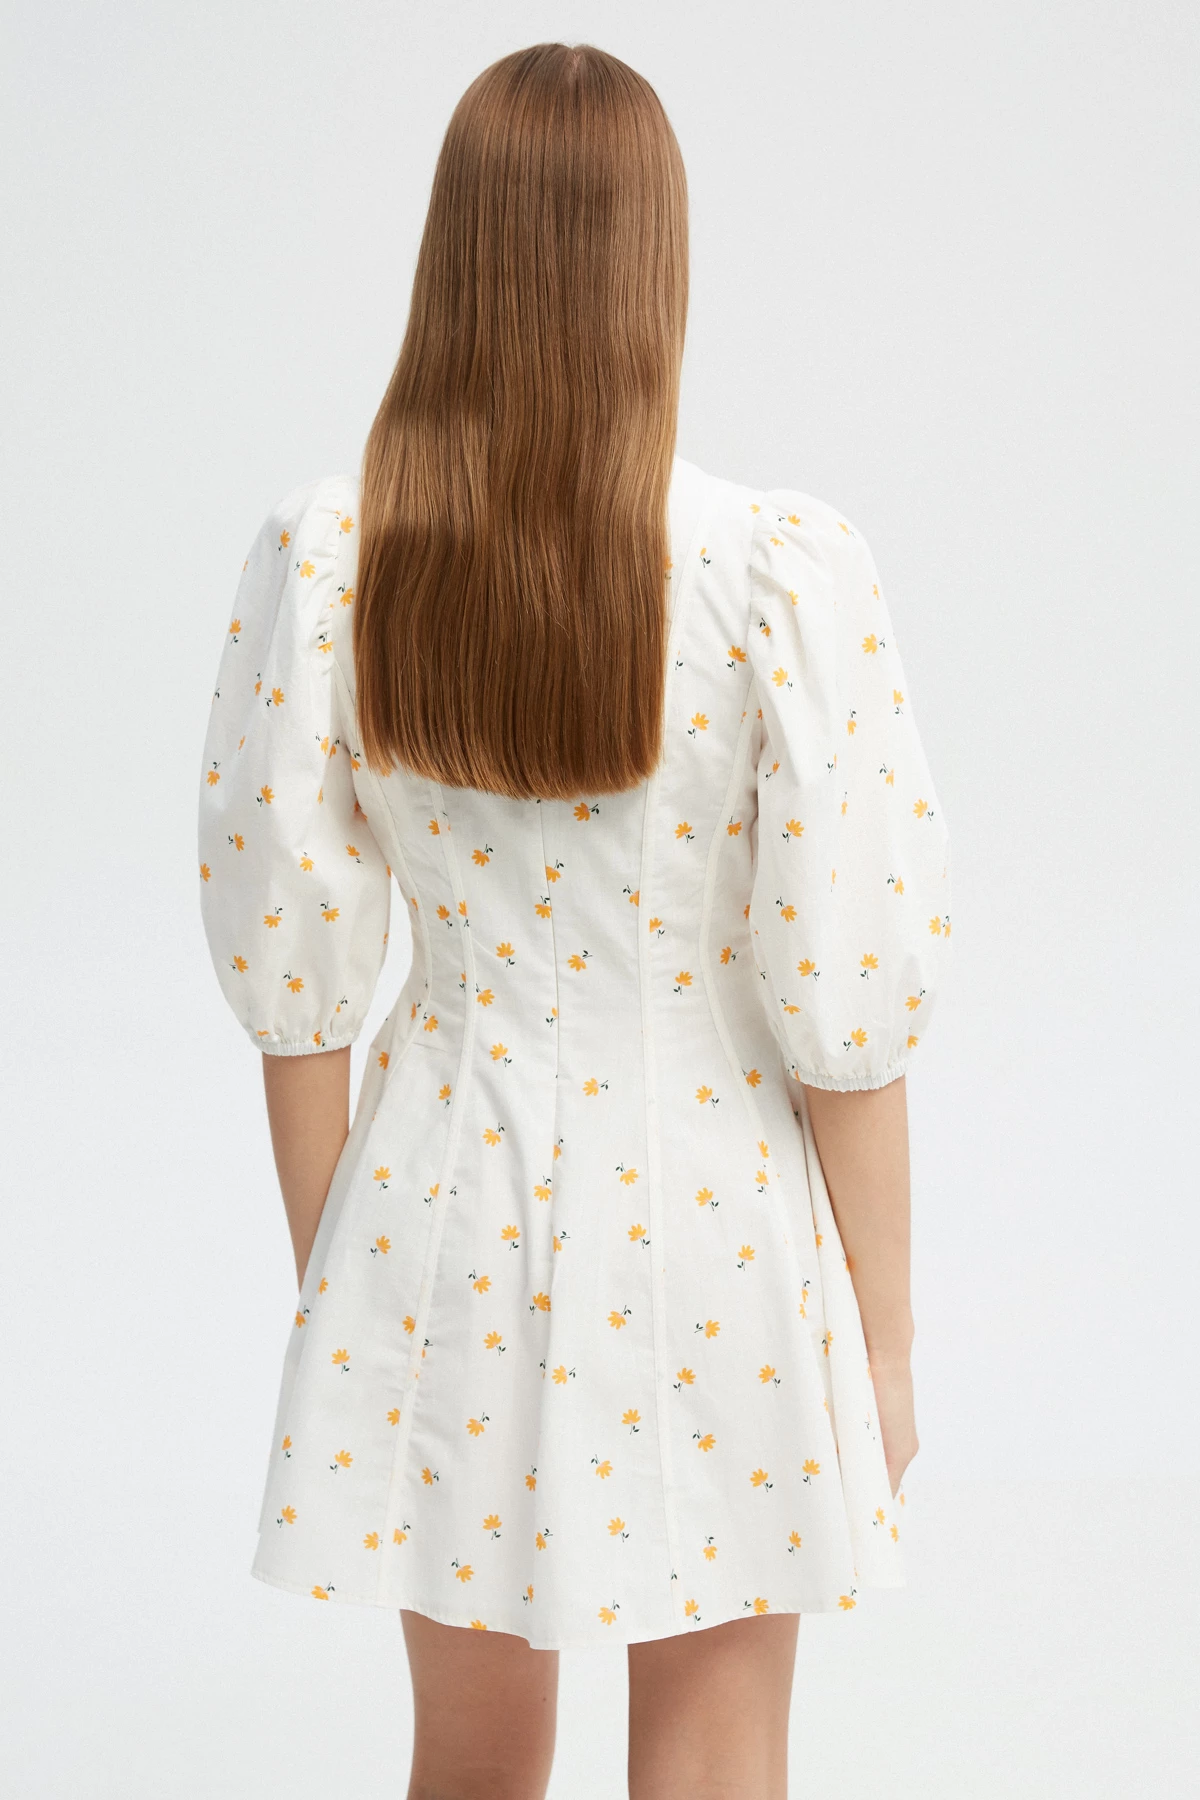 White short cotton dress with yellow flowers print, photo 4